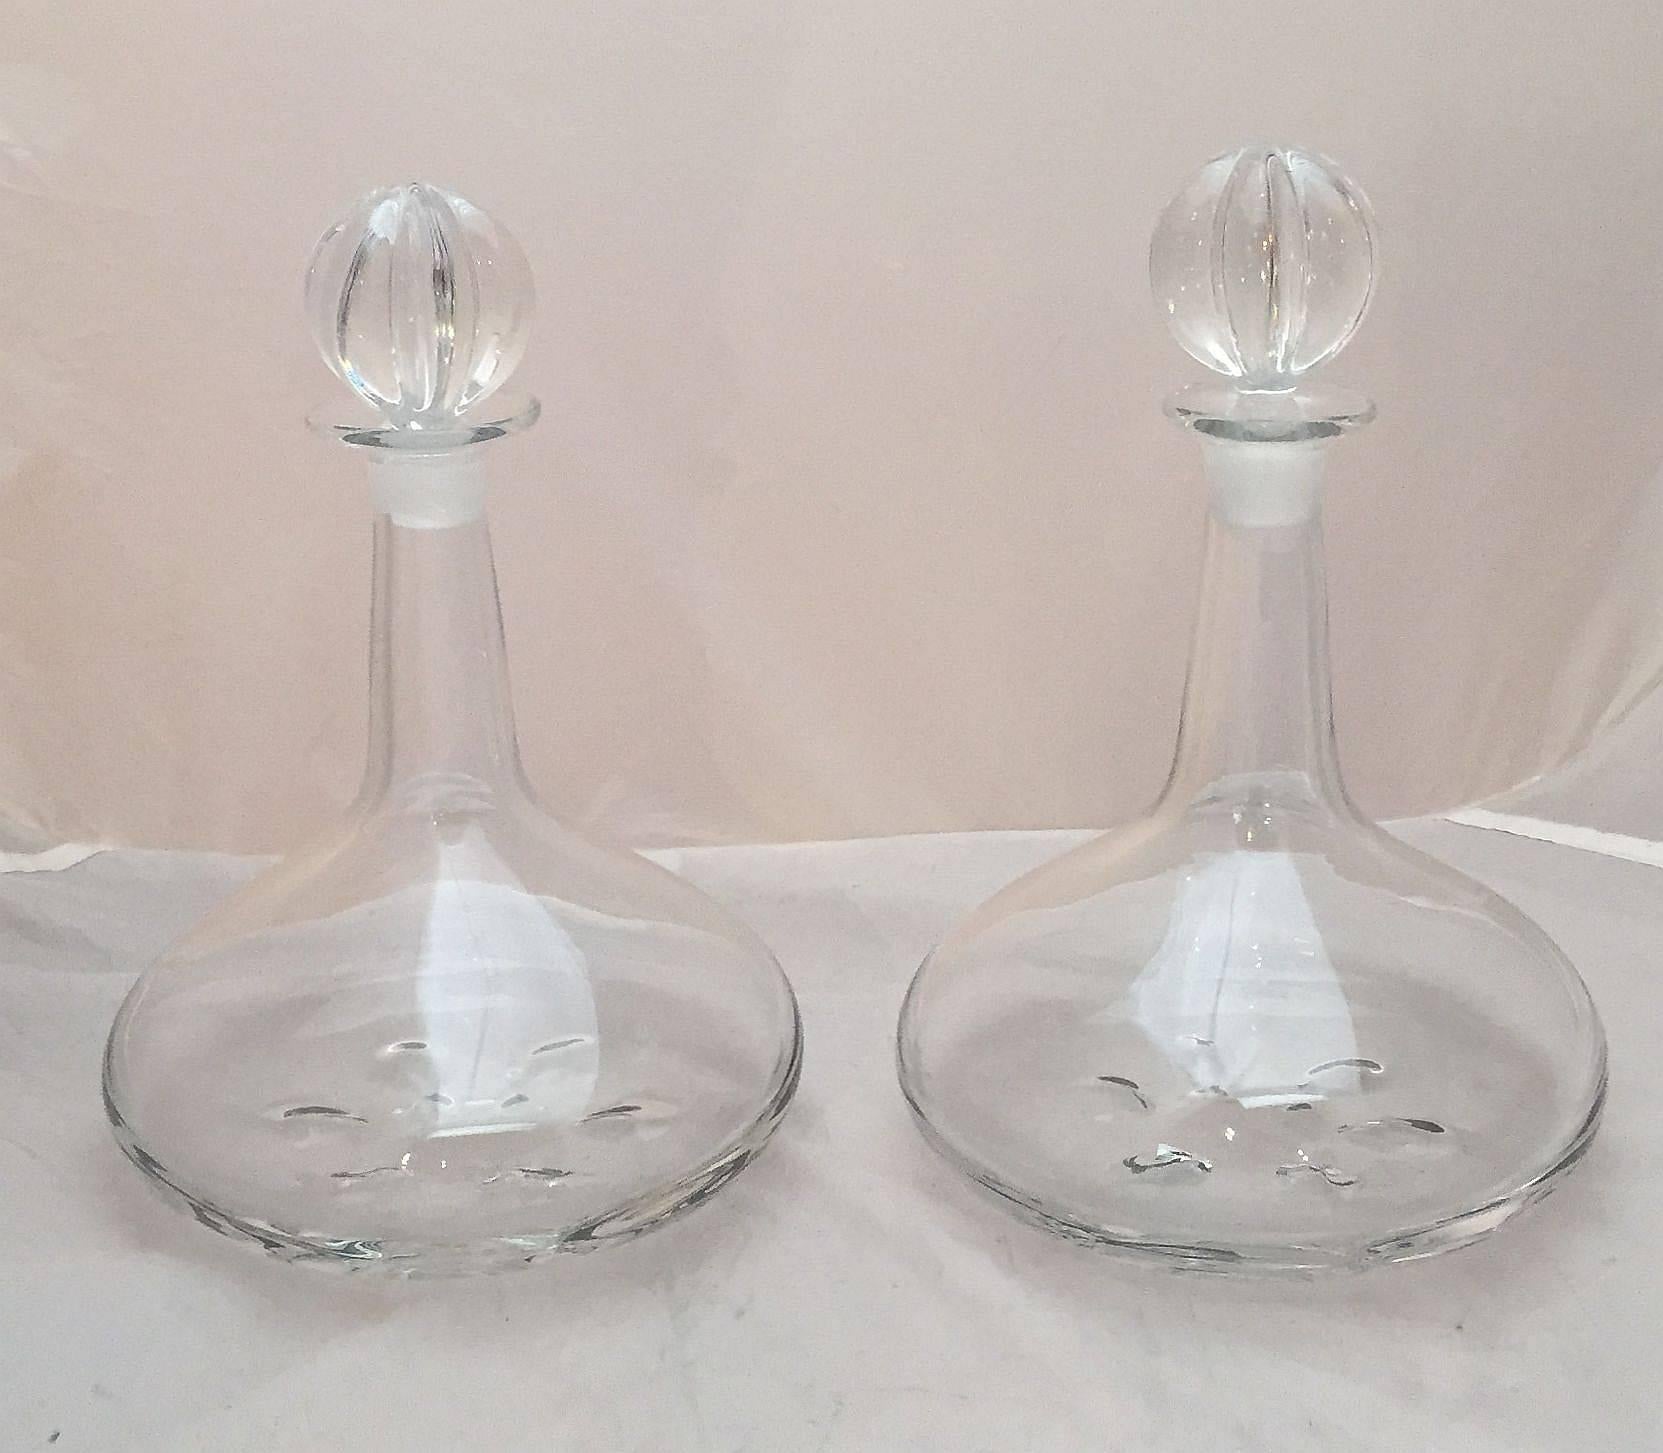 A fine pair of large crystal drinks decanters or ship's decanters for wine, whiskey, and spirits, designed by Nils Landberg for Orrefors, Sweden, who worked for the firm from 1927-1972. 
Each decanter with an elegant modern or mid-century design